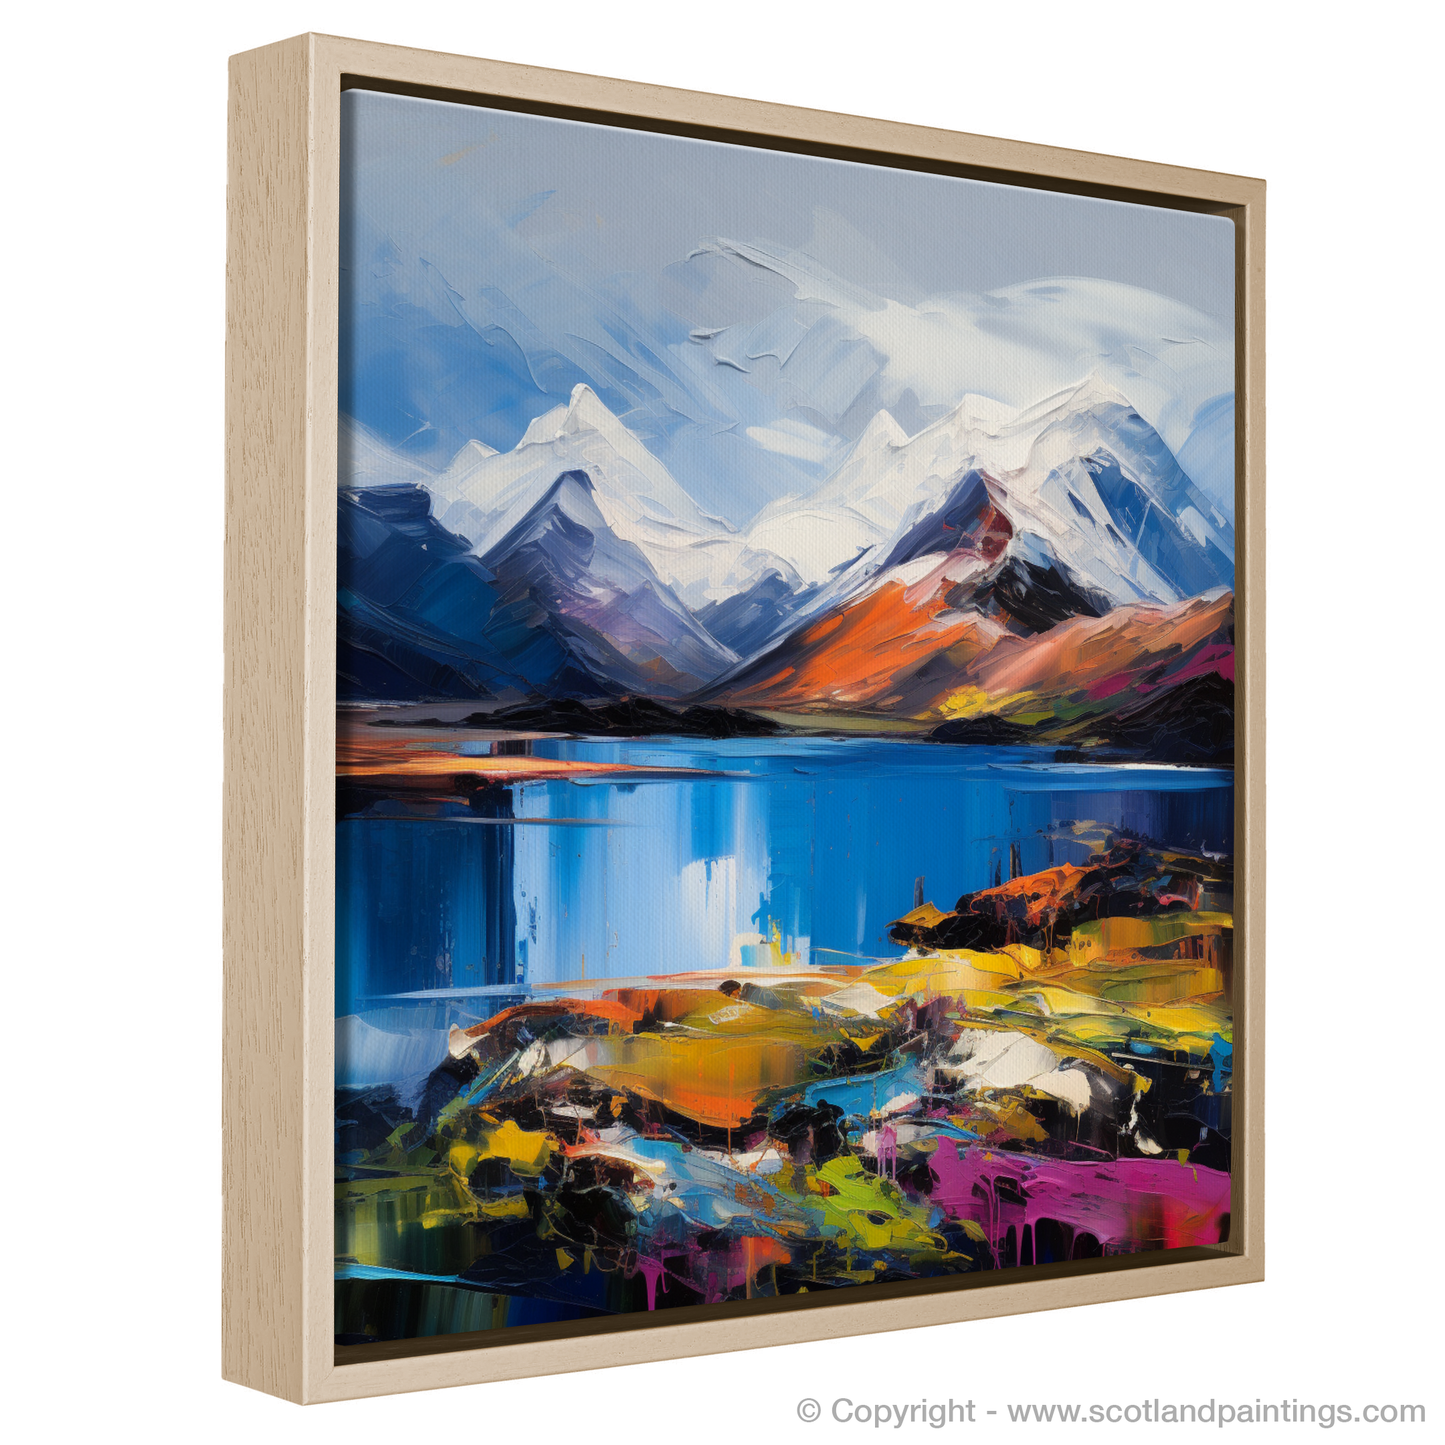 Painting and Art Print of Snow-capped peaks overlooking Loch Lomond entitled "Loch Lomond's Snowy Peaks: An Expressionist Ode to Scotland's Wild Beauty".